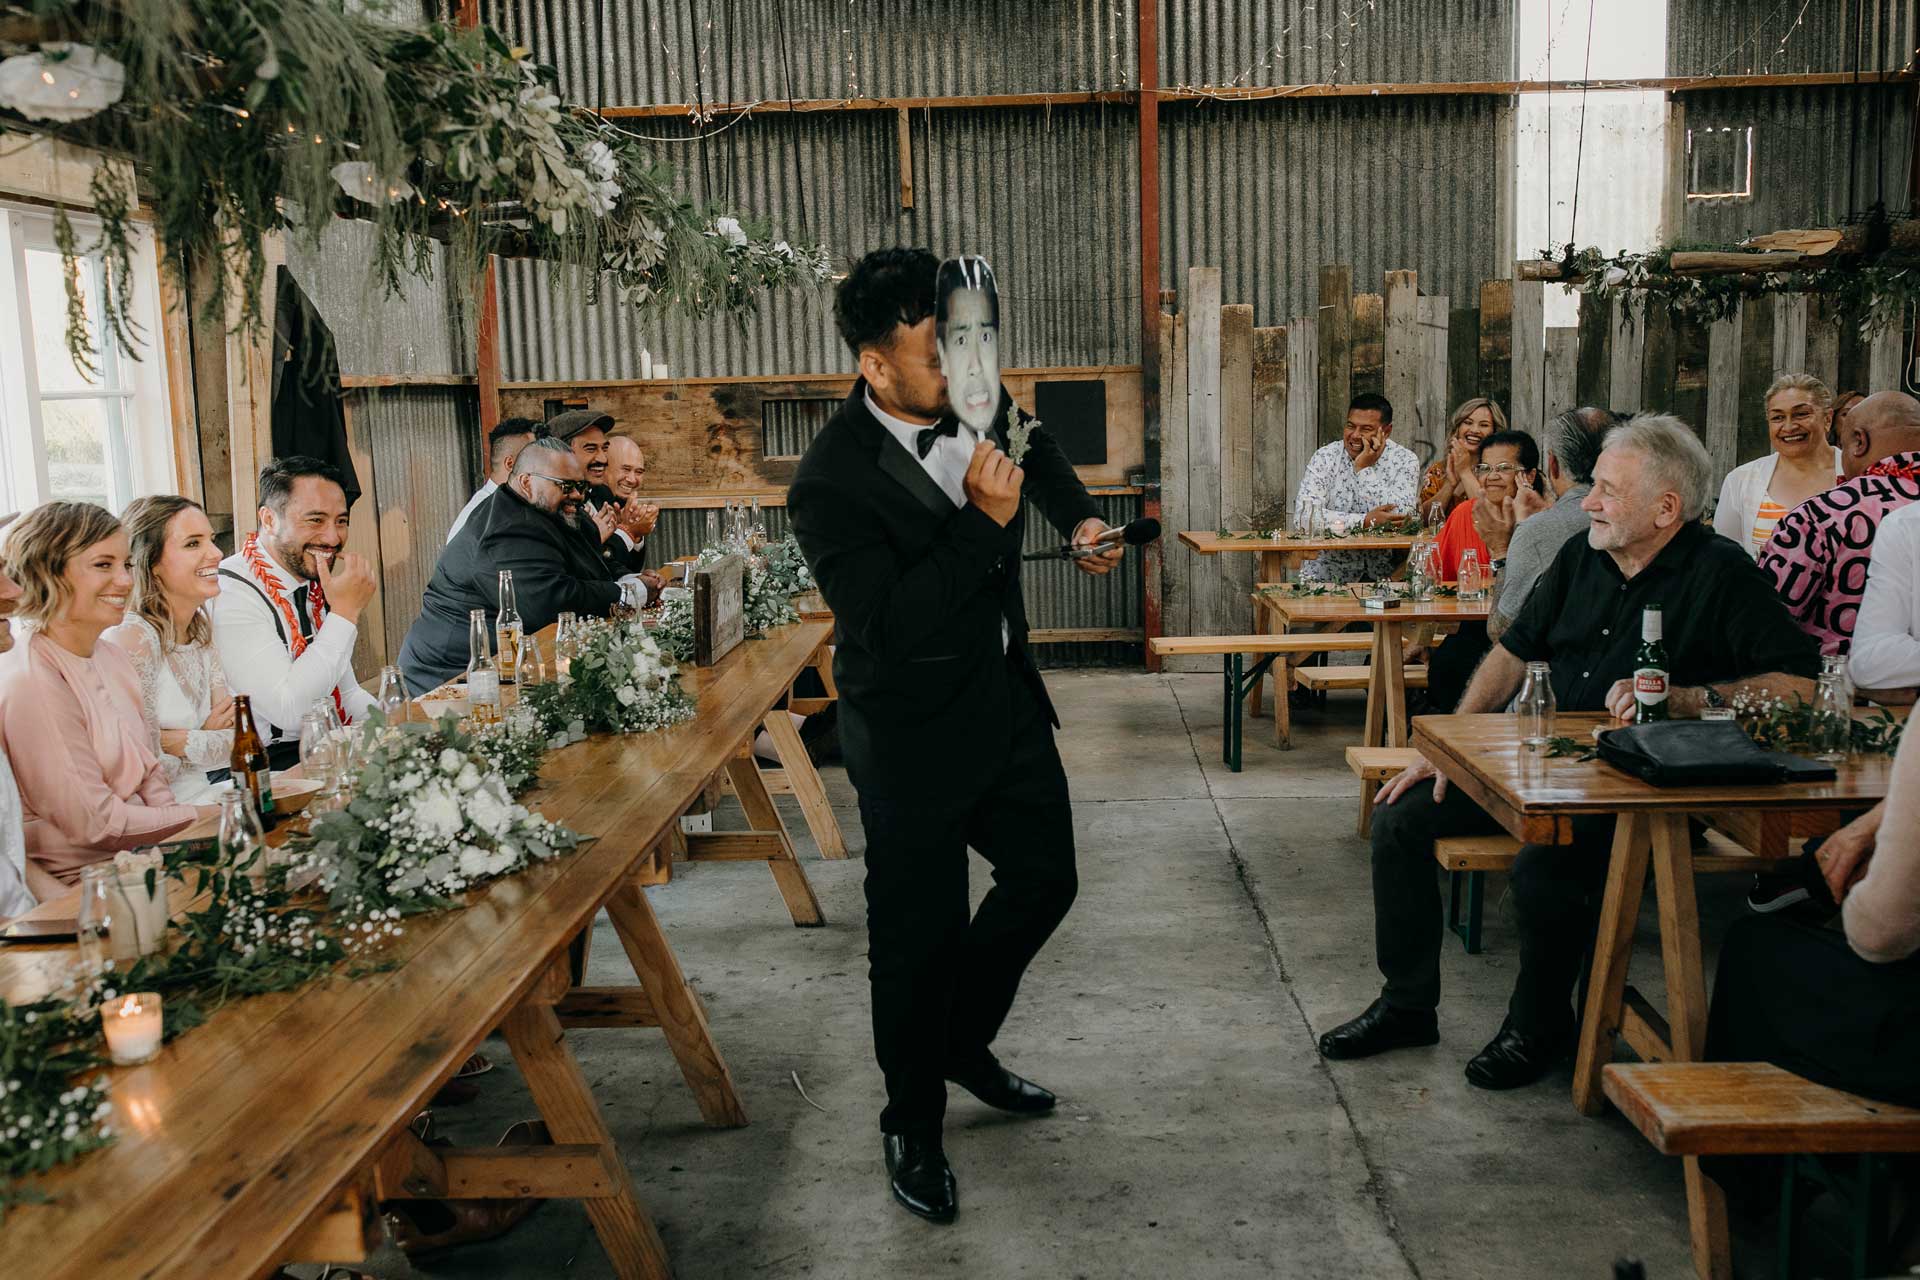 wedding speeches at rustic DIY barn reception in west auckland photos by sarah weber photography